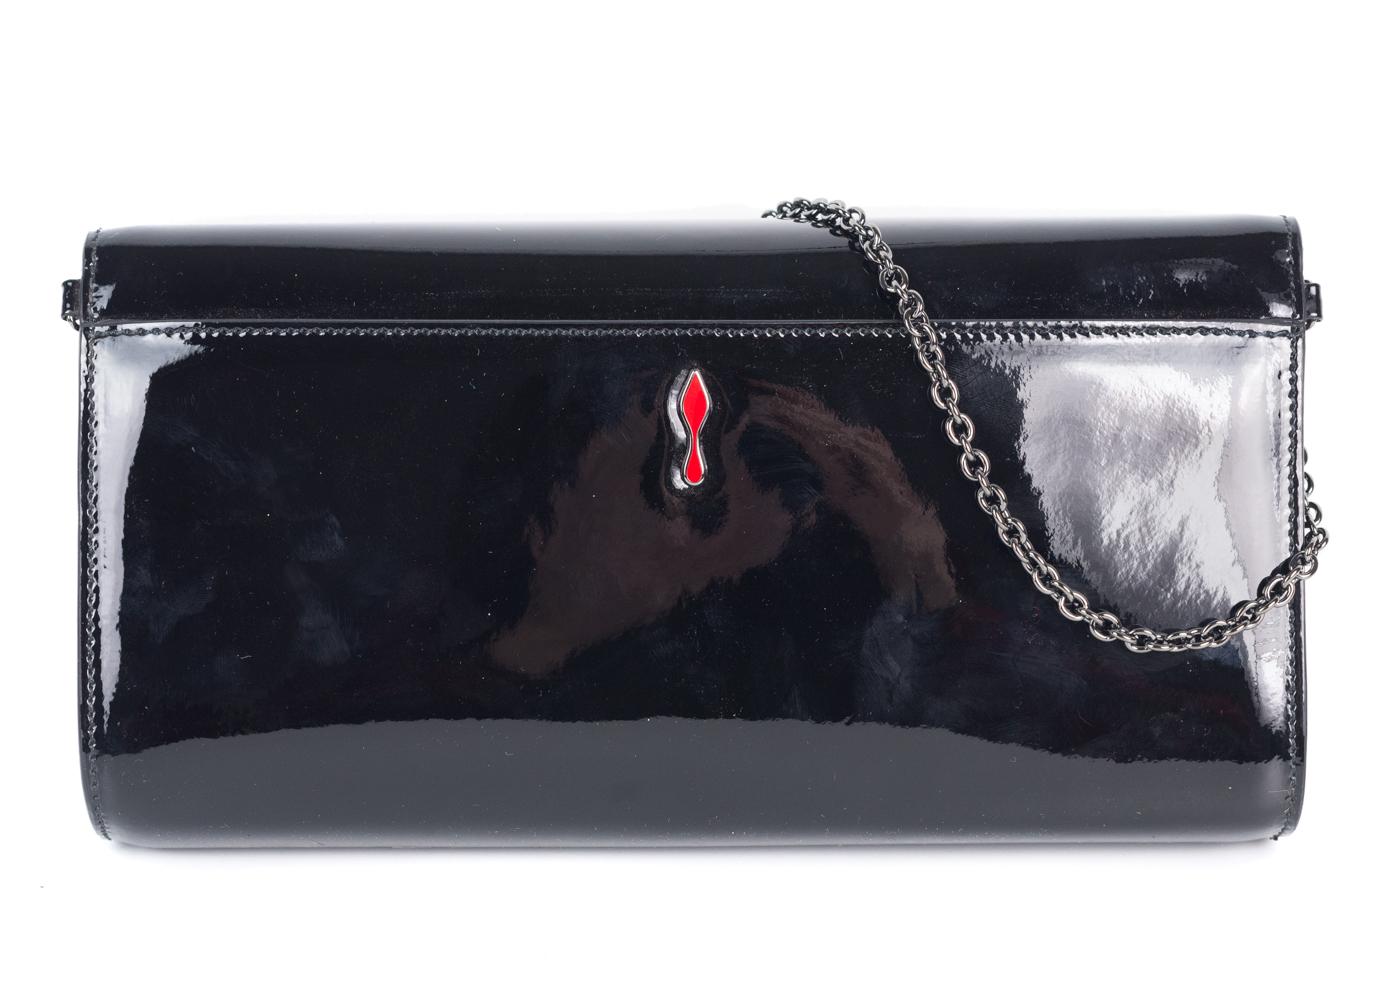 Christian Louboutin Women's Black Patent Rivera Clutch In New Condition For Sale In Brooklyn, NY